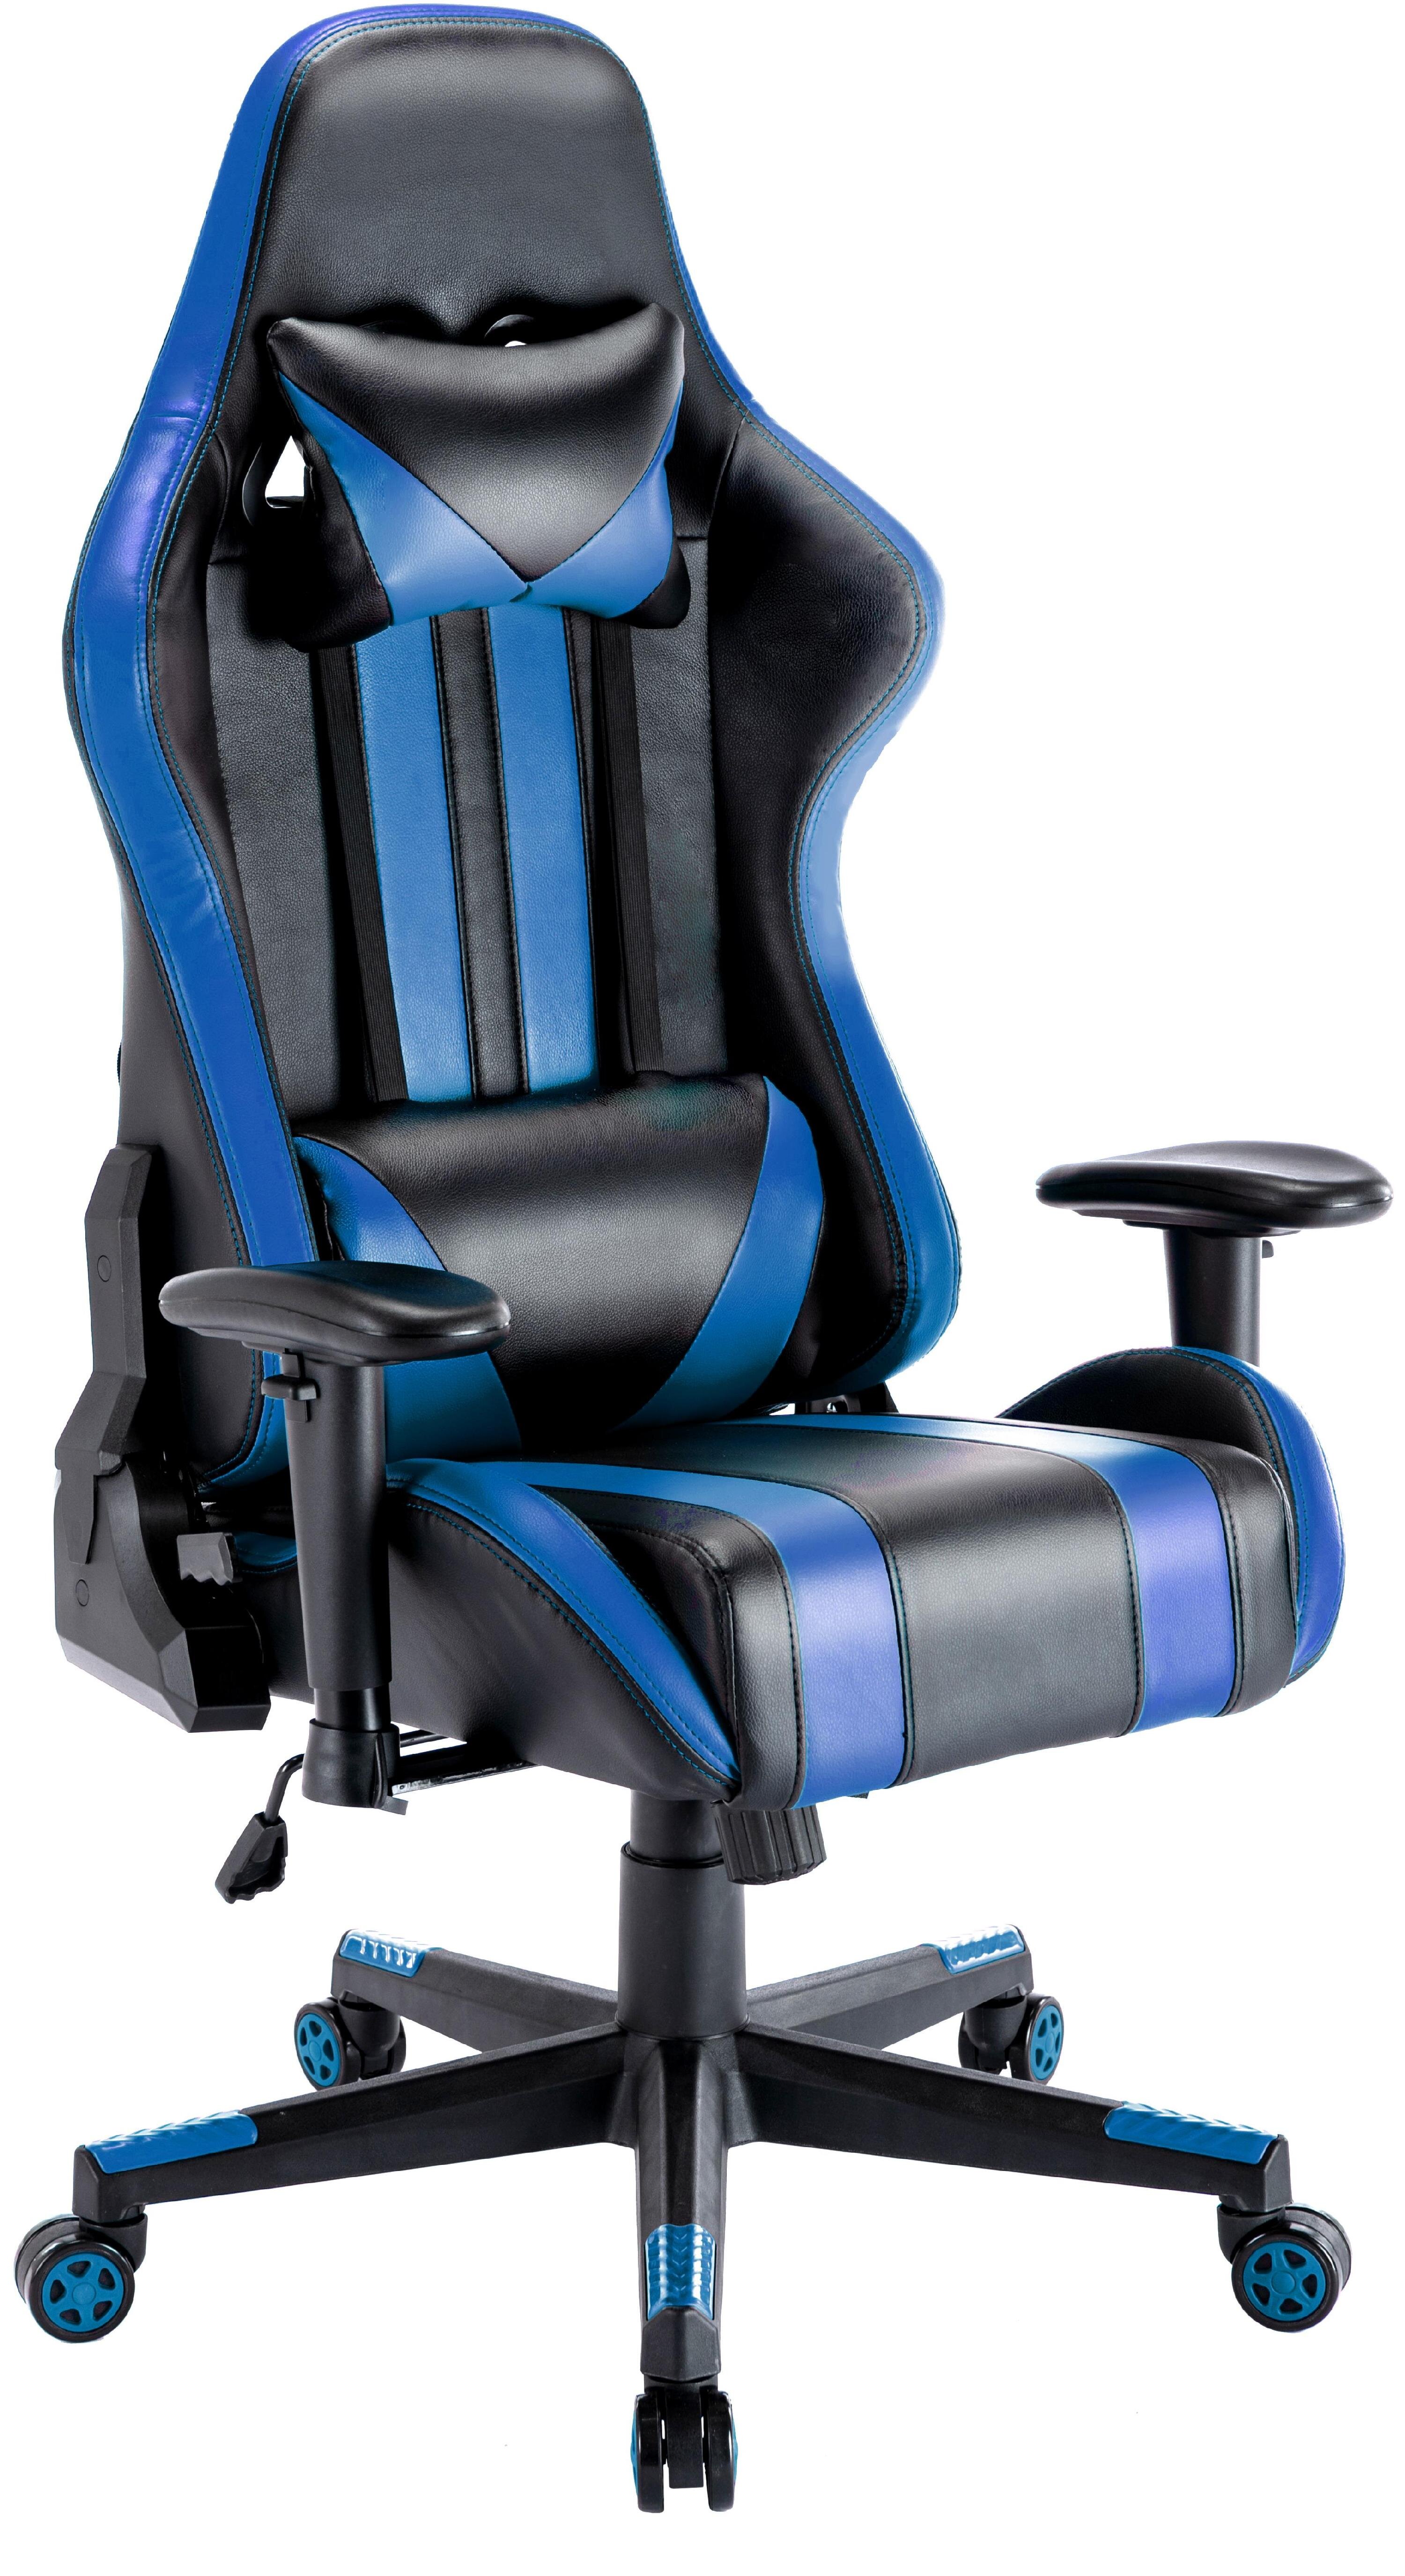 Headrest and Armrest Grey Ergonomic Video Game Chair Gamer Chair Racing Chair with Lumbar Support Gaming Chair Big and Tall Office Chair High Back Computer Chair